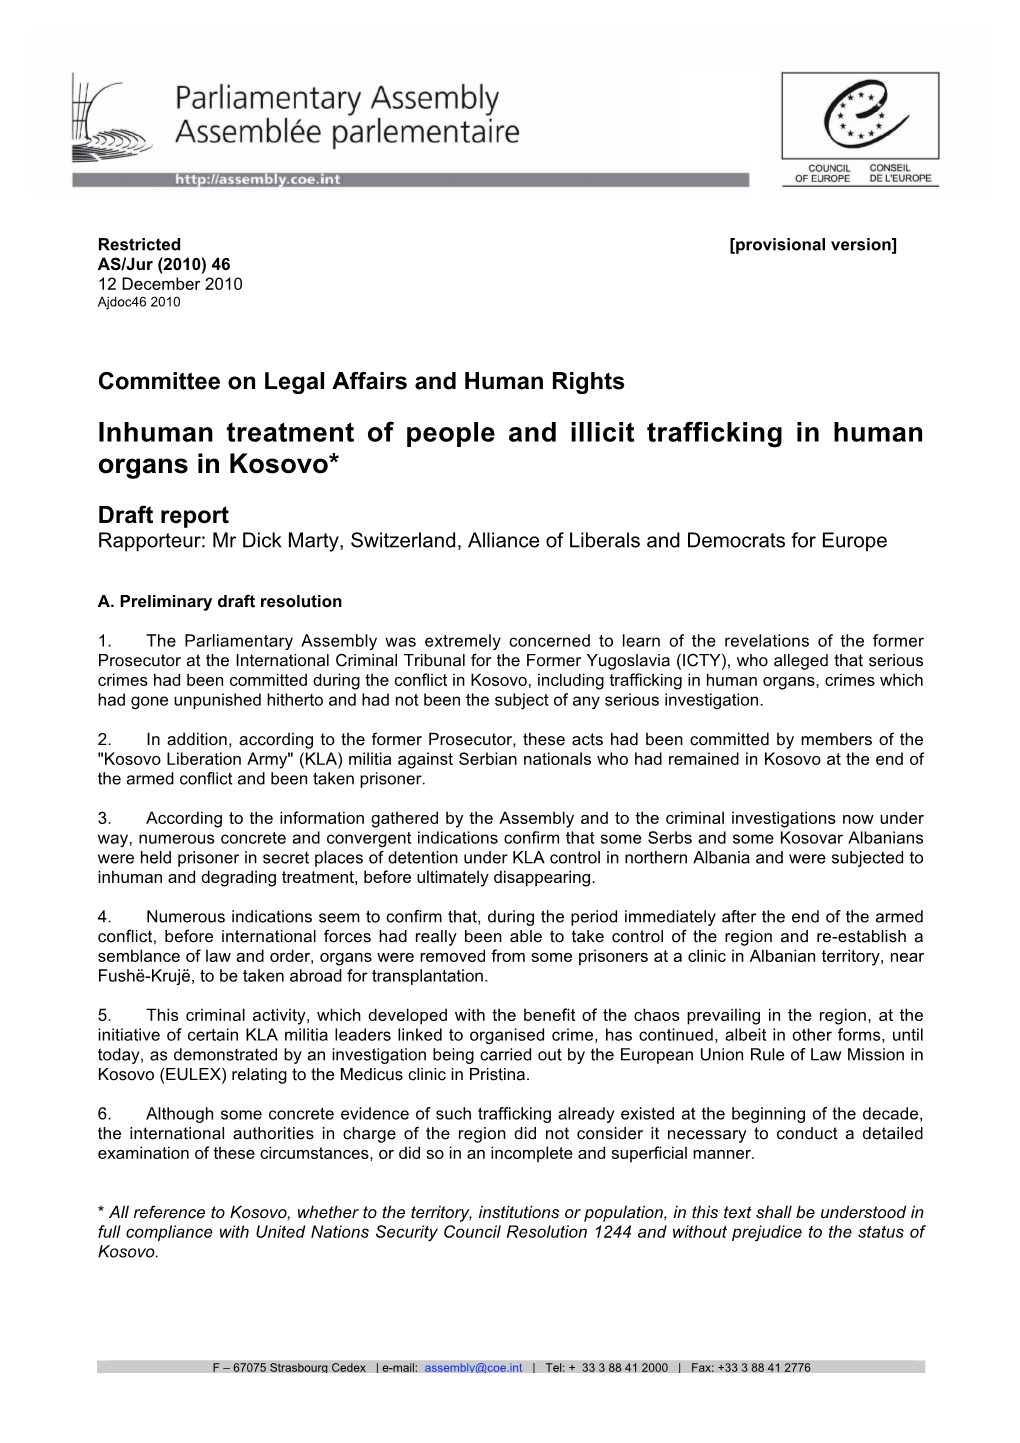 Inhuman Treatment of People and Illicit Trafficking in Human Organs in Kosovo*